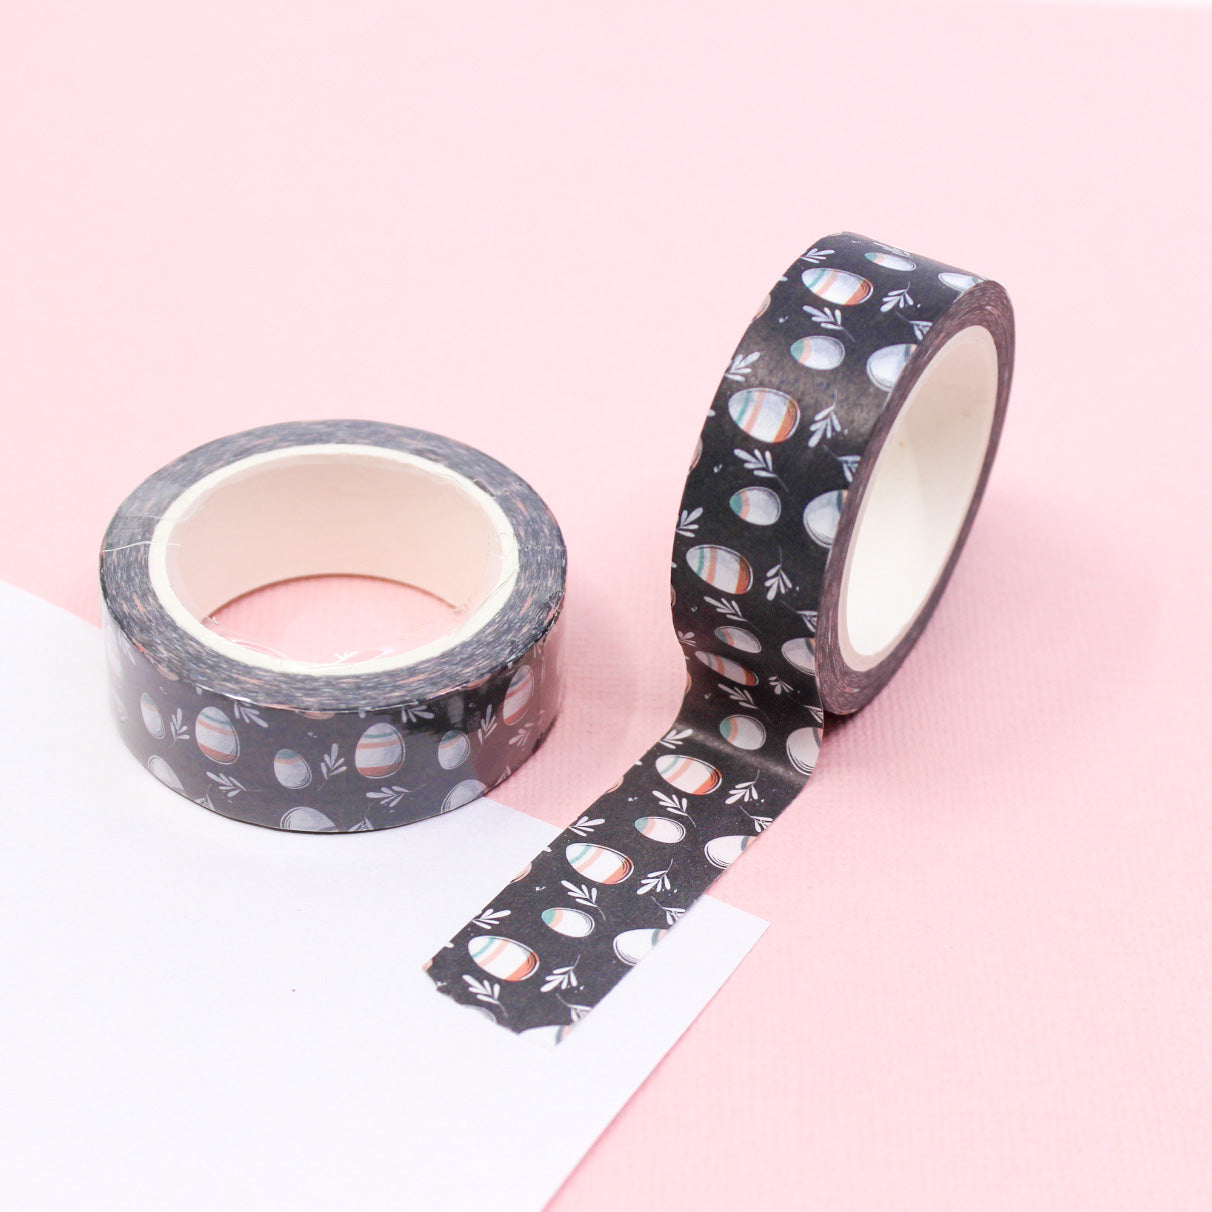 Black & White Easter Egg Washi Tape: Add a classic touch to your Easter crafts with this black and white Easter egg washi tape. Perfect for card-making, scrapbooking, and more. This tape is sold at BBB Supplies Craft Shop.